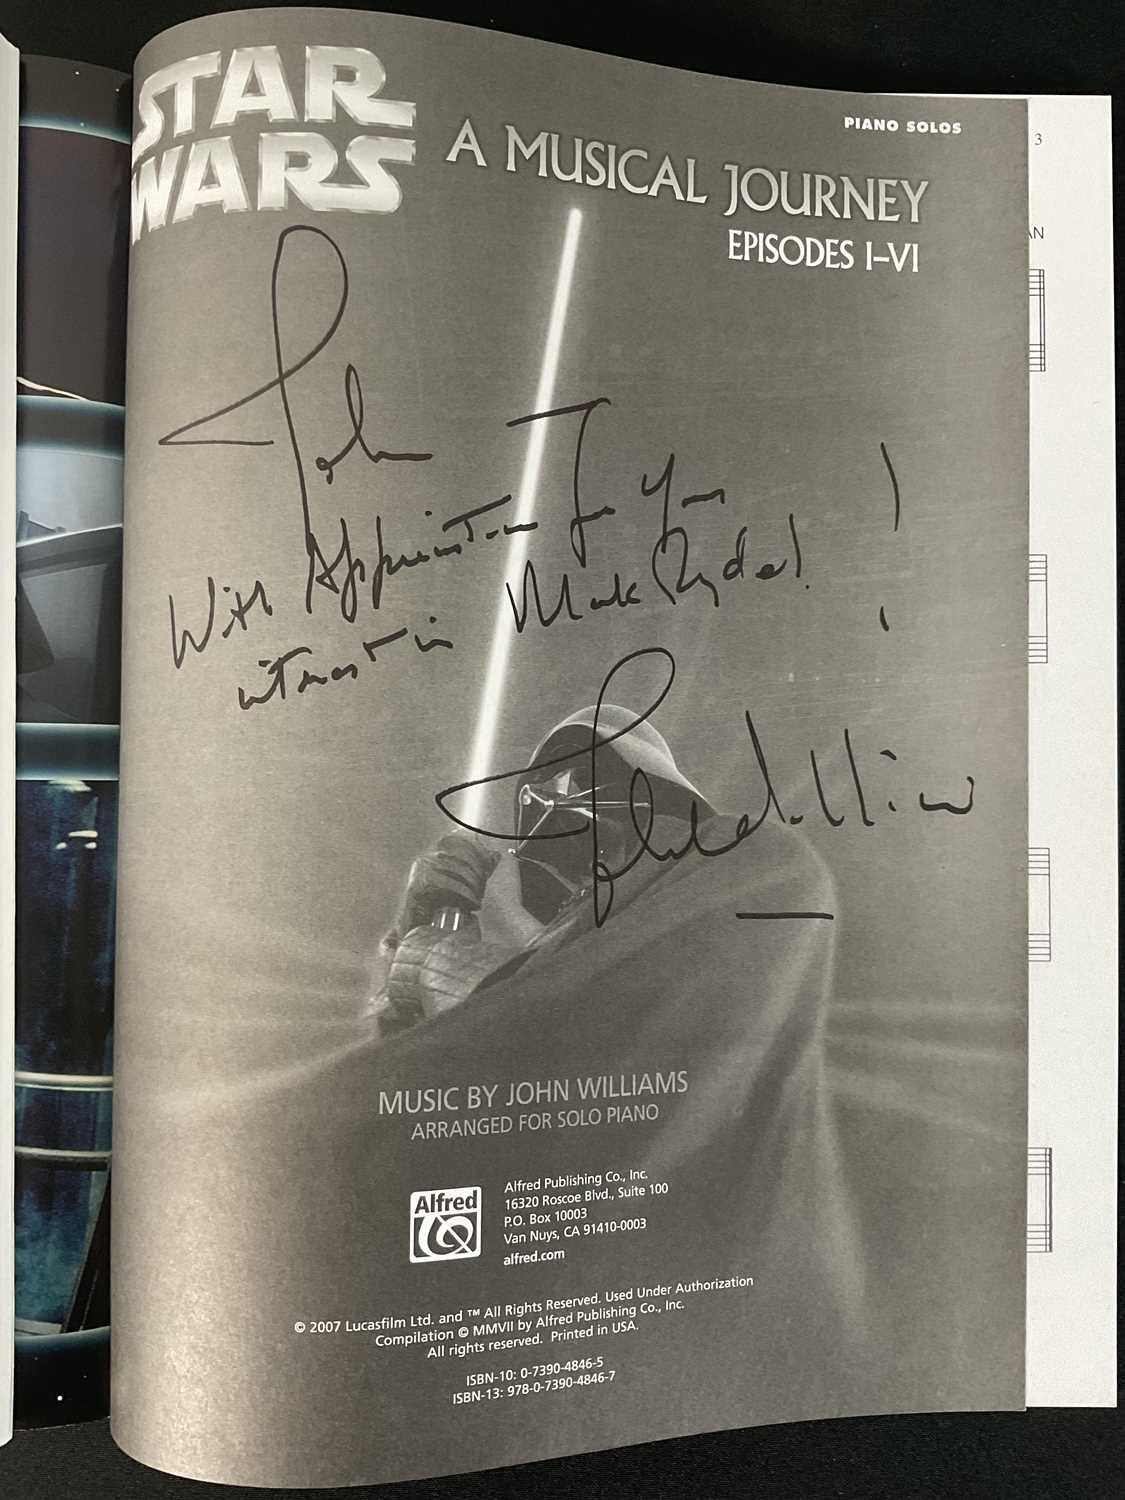 A group of three JOHN WILLIAMS signed sheet music books - STAR WARS A MUSICAL JOURNEY EPISODES I-VI, - Image 2 of 5